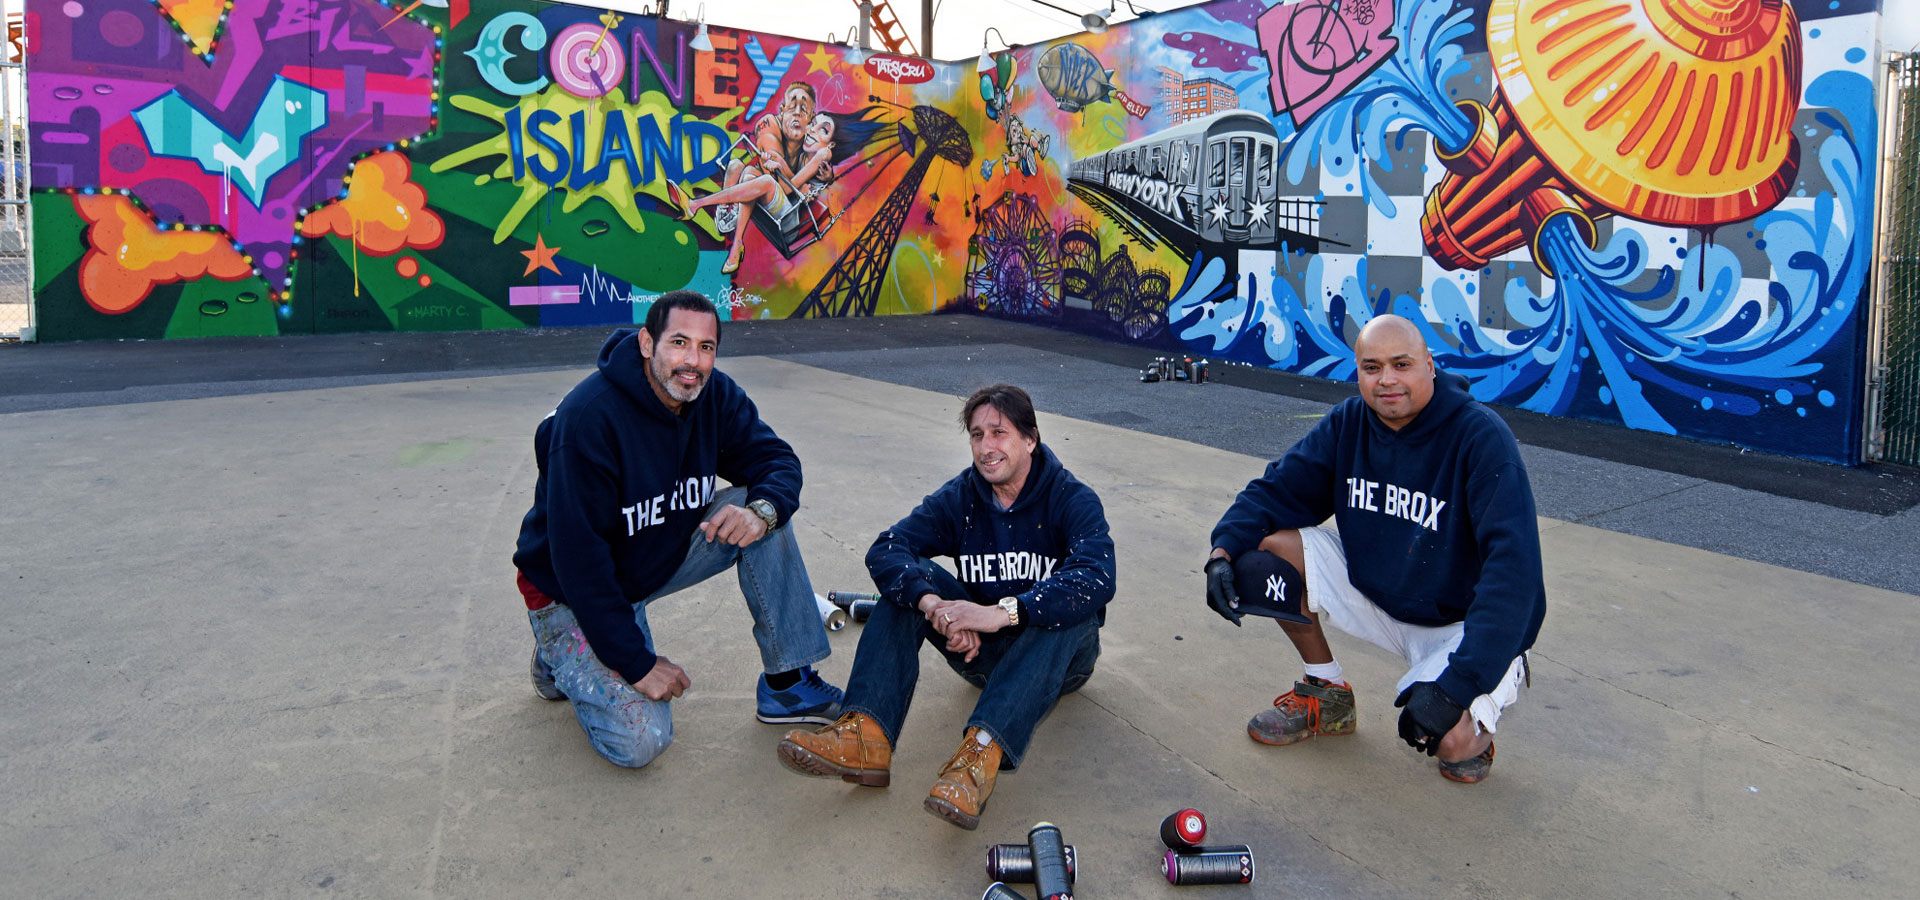 Three people sitting with spray paint cans in front of a colorful mural